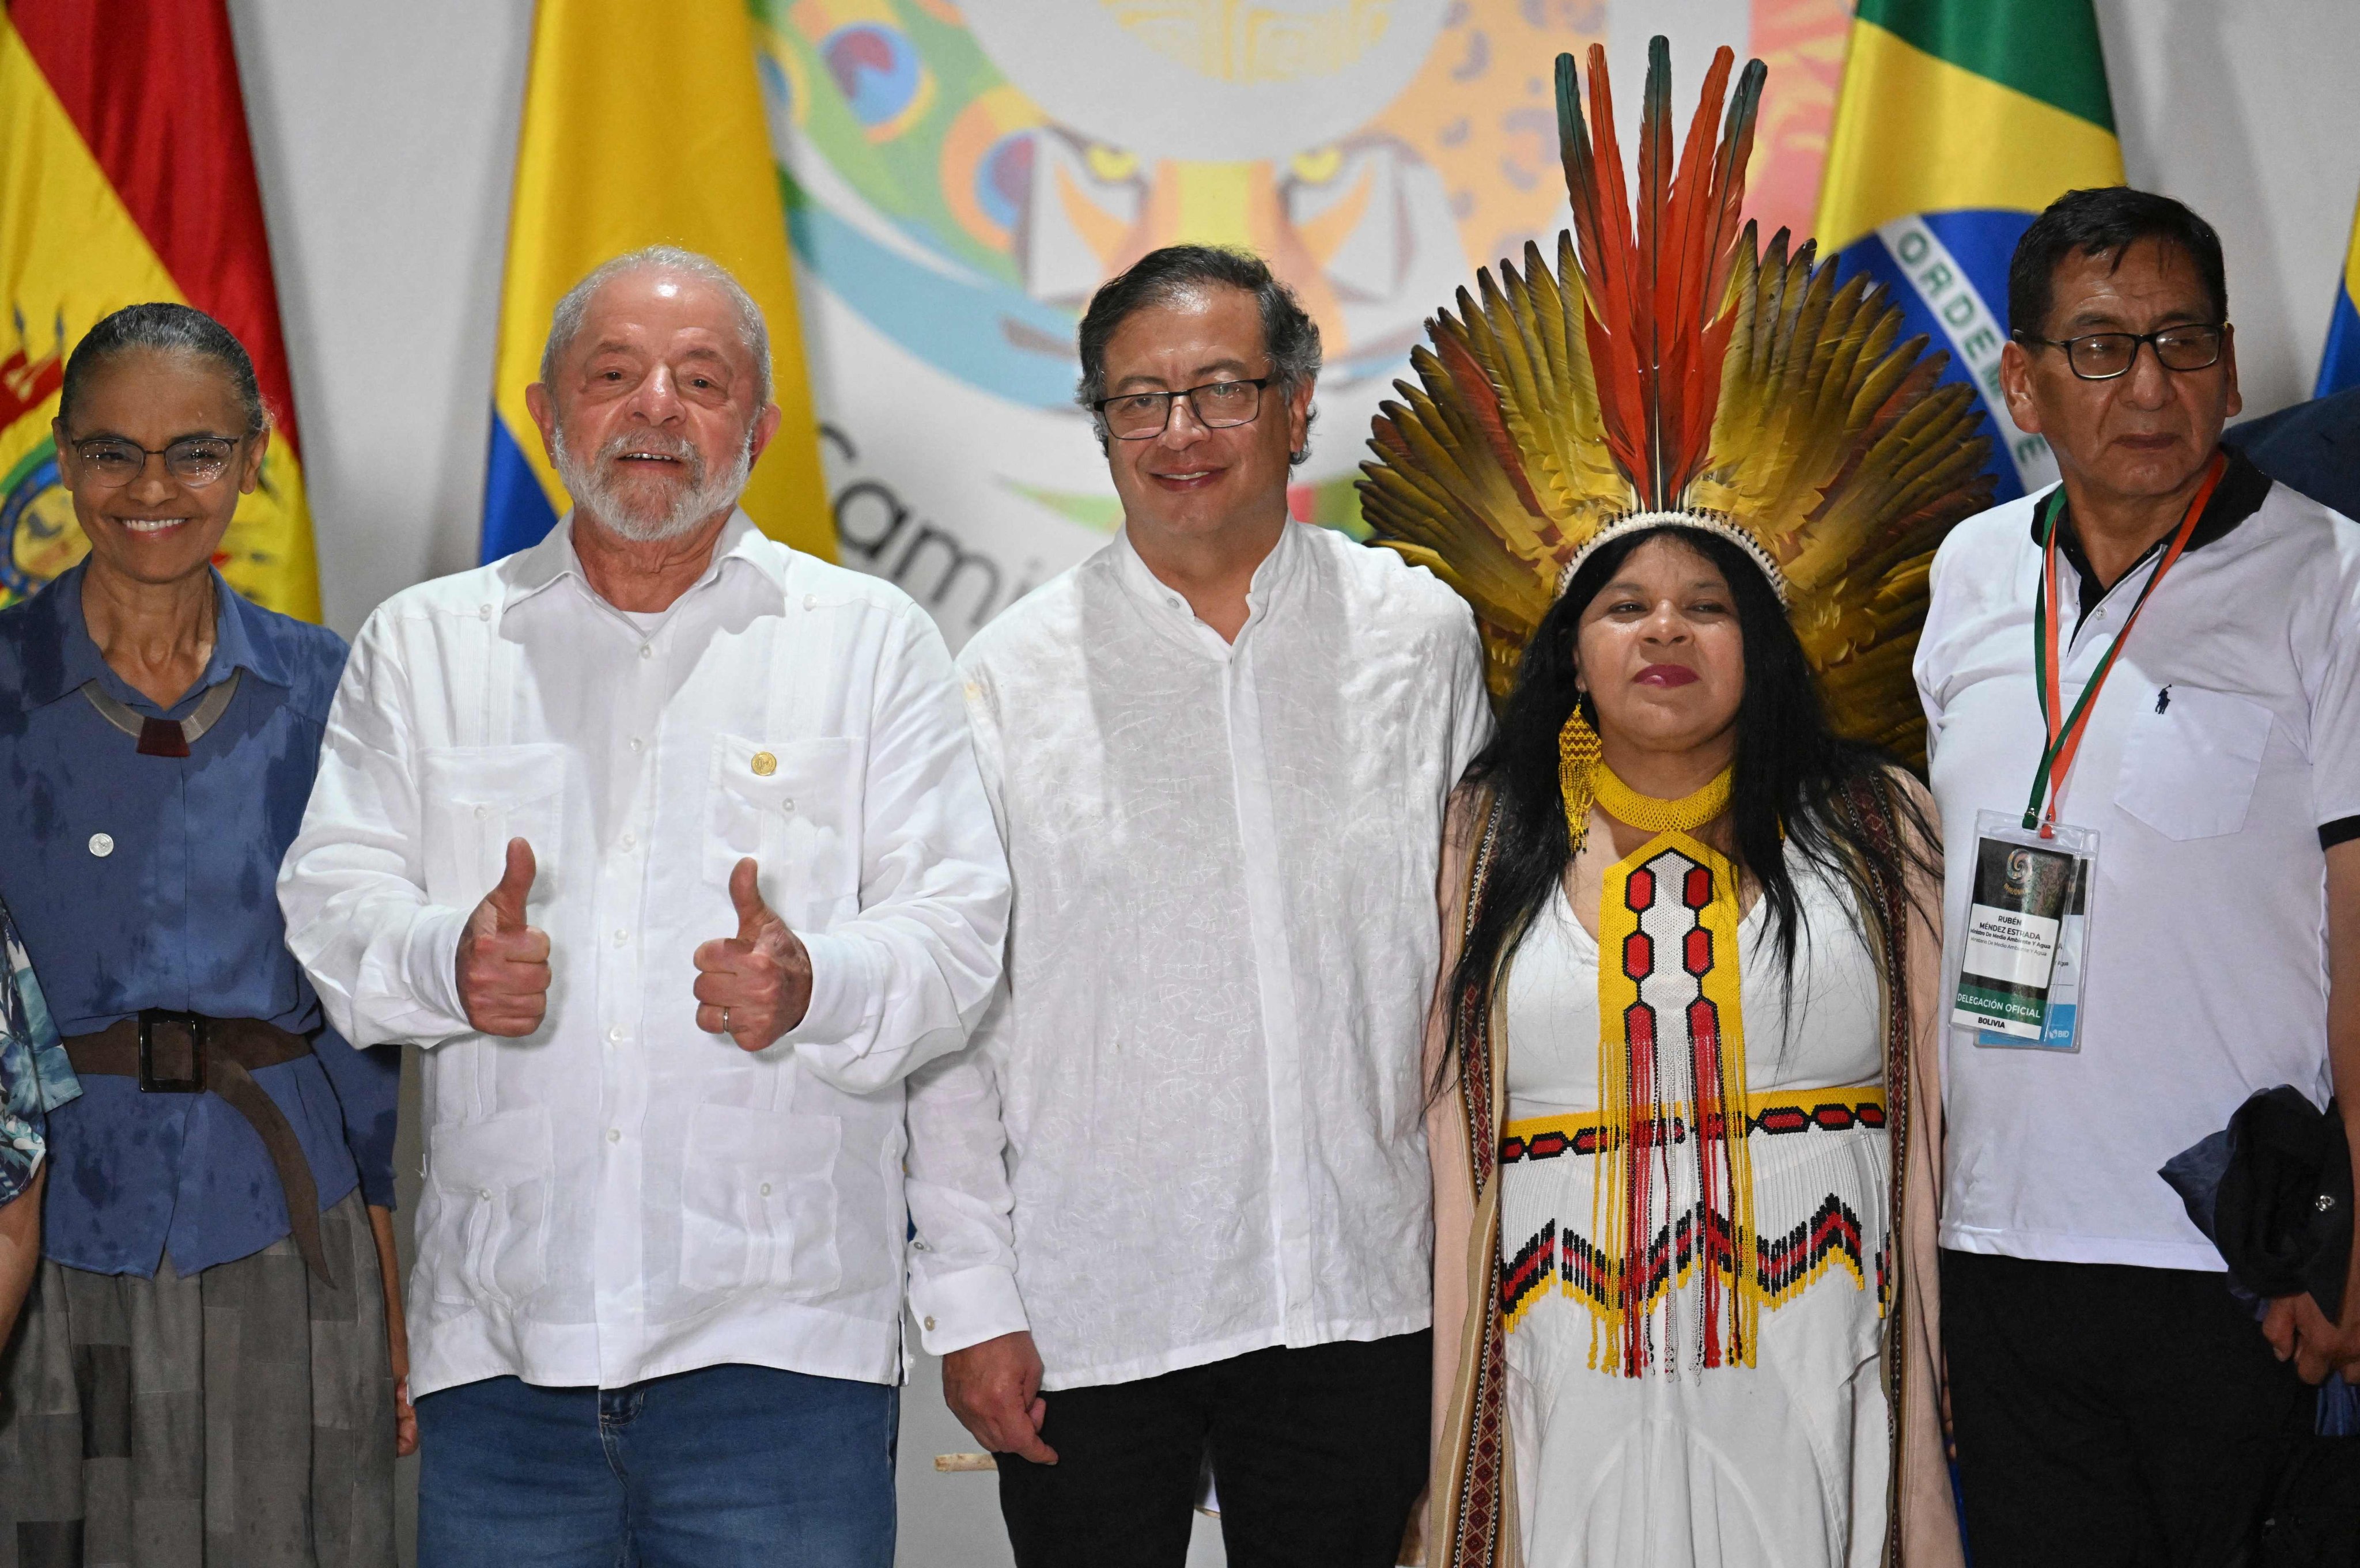 From left, Brazilian environment minister Marina Silva, Brazilian President Luiz Inacio Lula da Silva, Colombian President Gustavo Petro and Brazilian minister for Indigenous peoples Sonia Guajajara after talks on the protection of the Amazon rainforest in Leticia, Colombia on Saturday. Photo: AFP